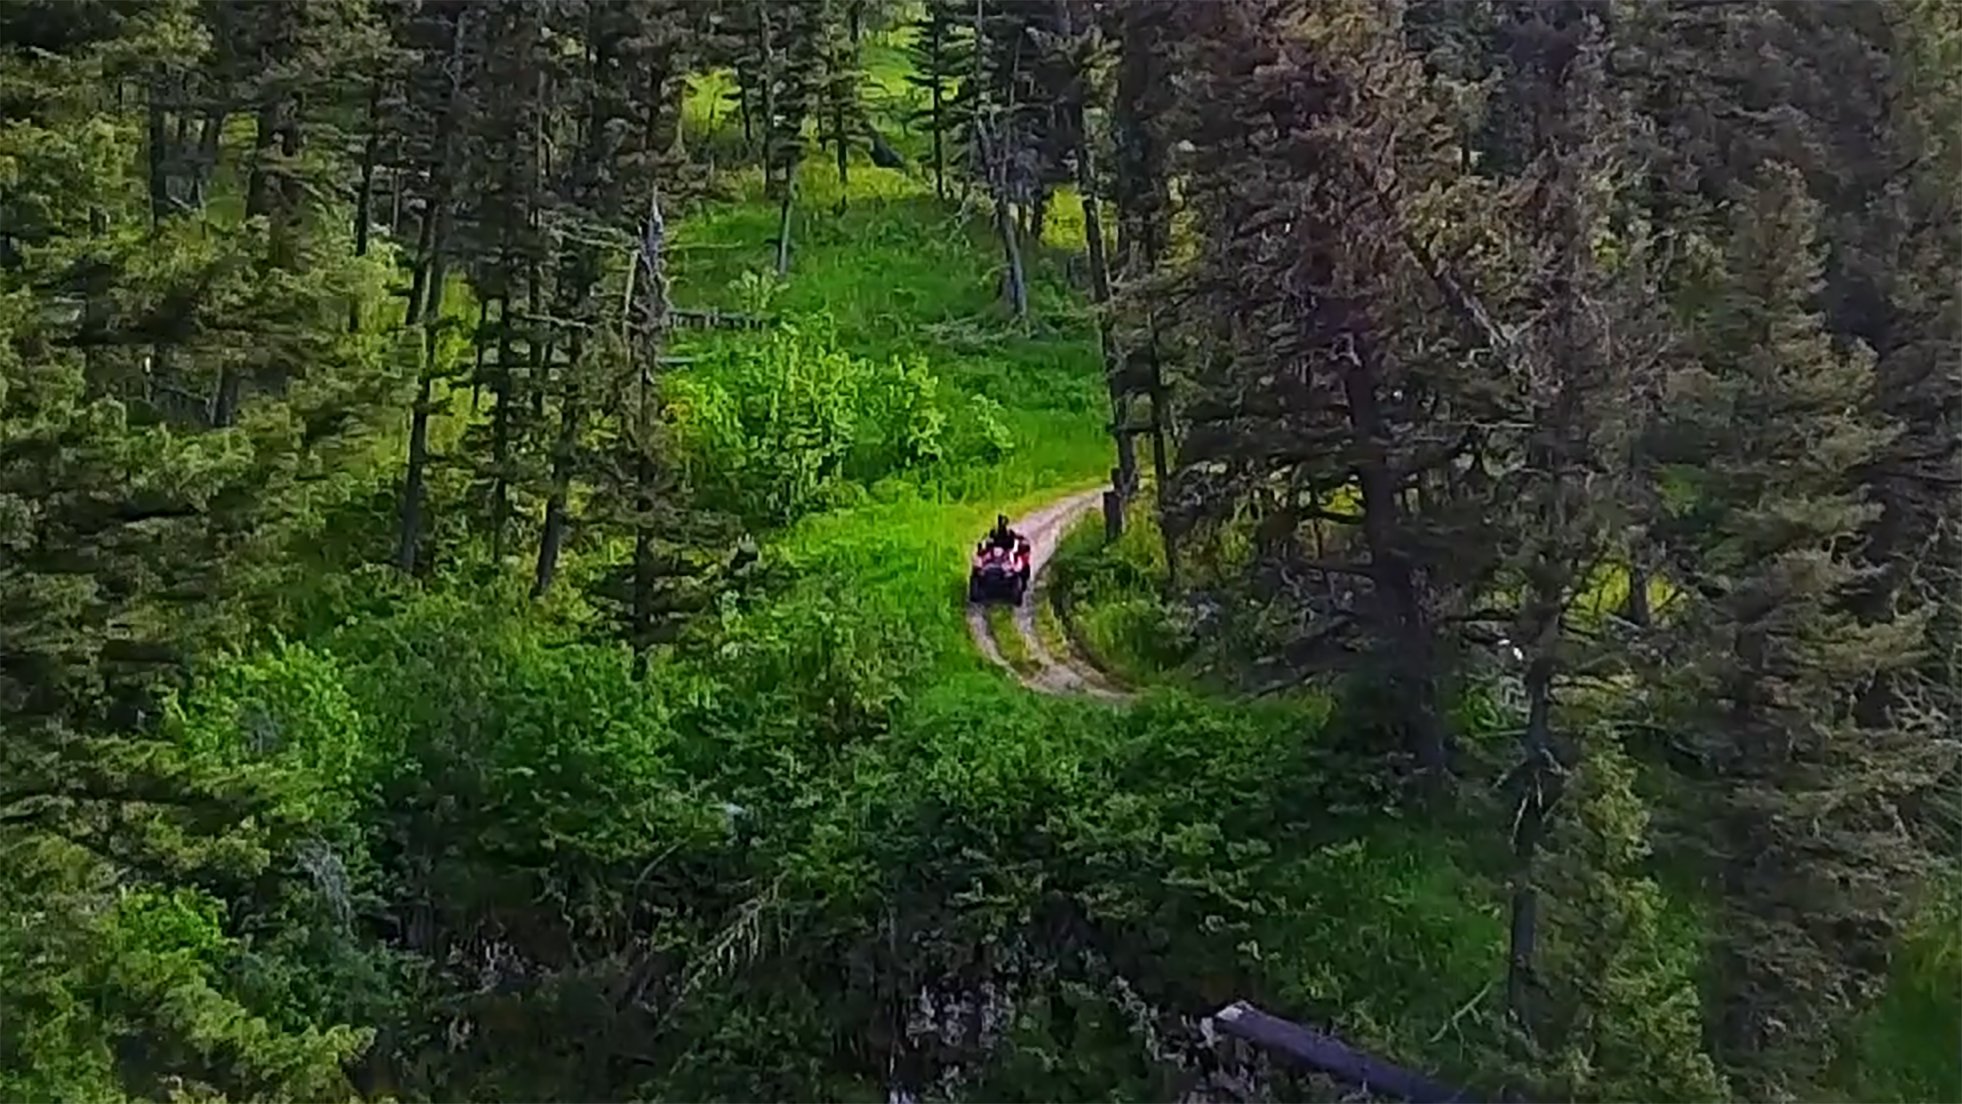 ATVing through the woods